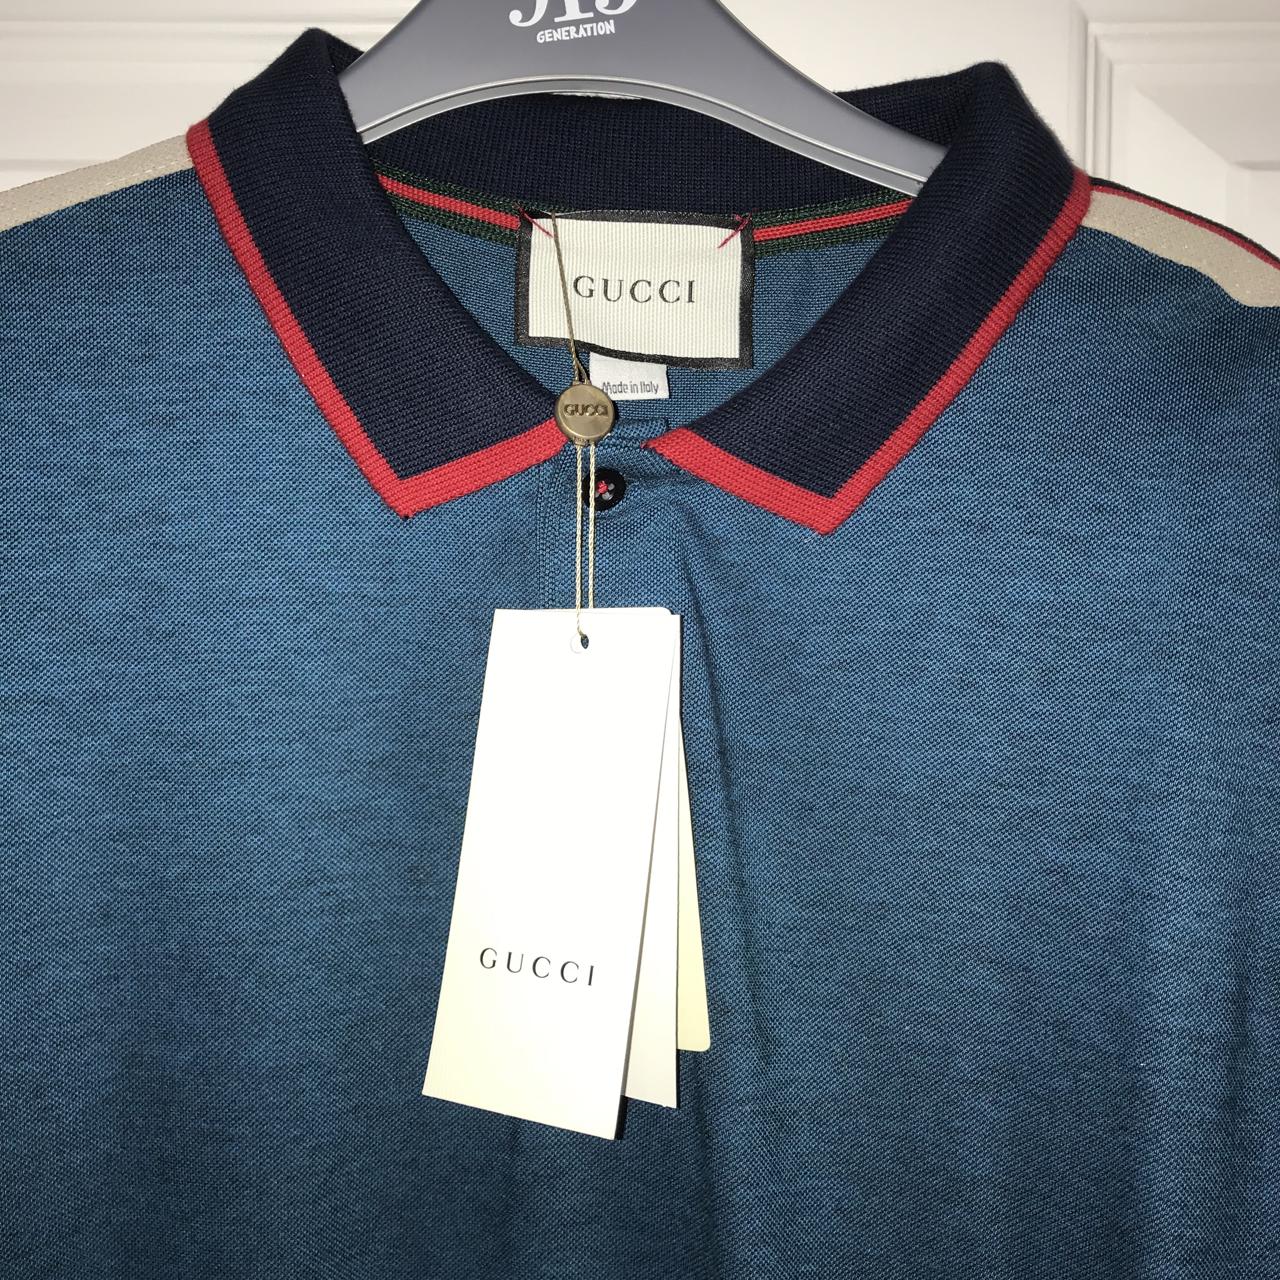 Gucci tee shirt colorful mens XL red blue yellow - Depop